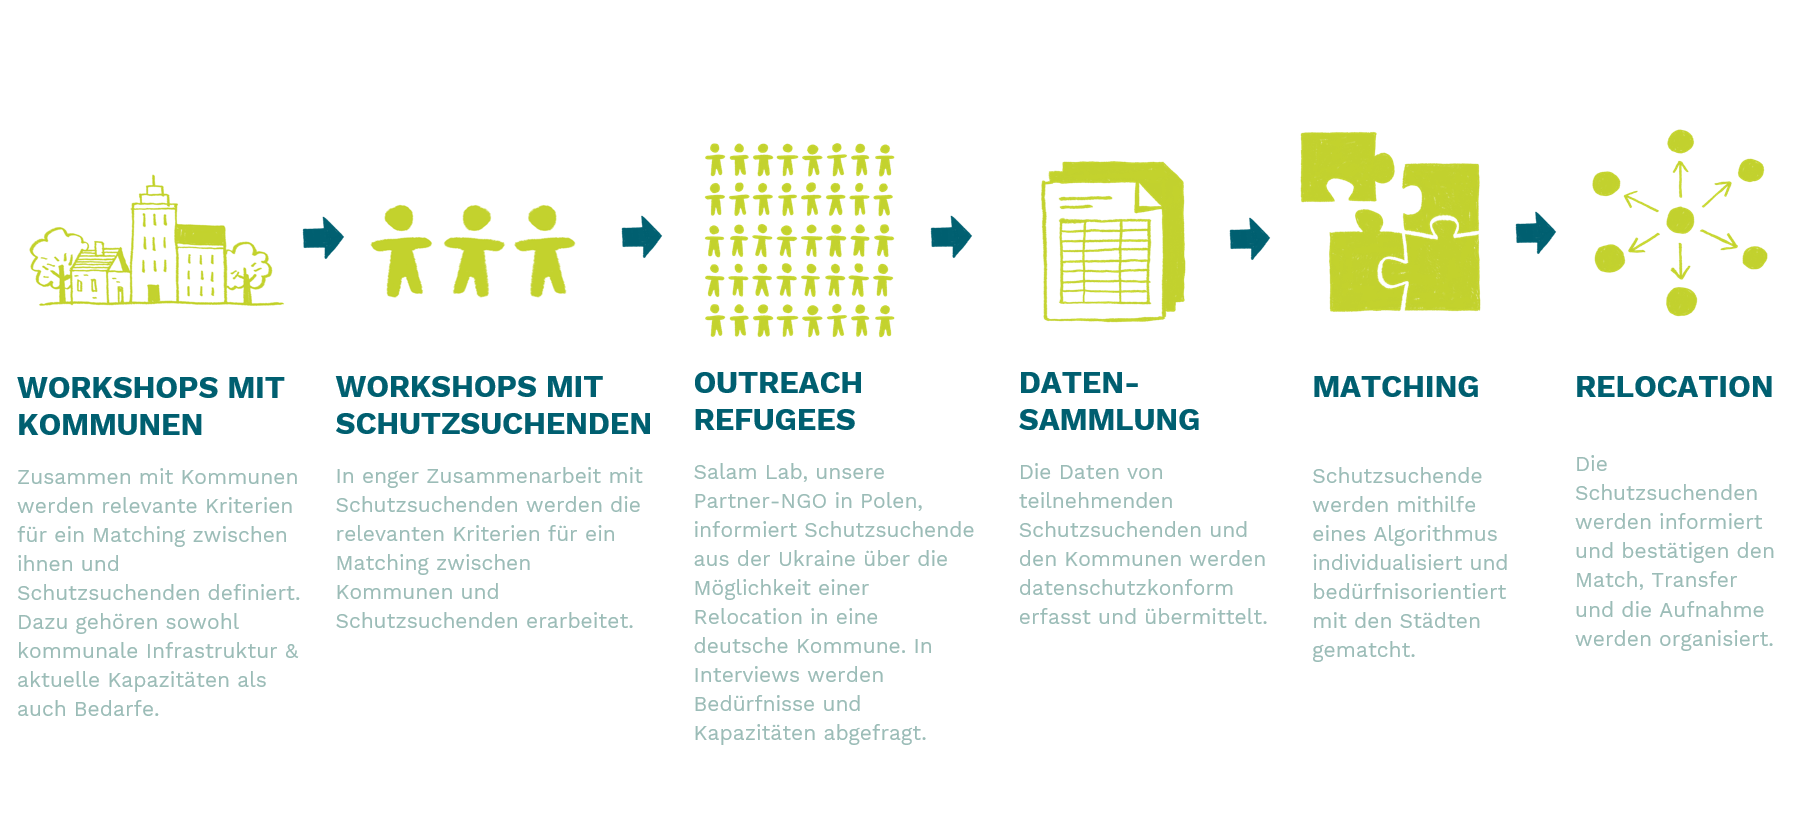 This graphic on the process of the migration project Re:Match - Relocation via Matching of the Berlin Governance Platform presents the key data of the planning and implementation. The content is as follows: 1. WORKSHOPS WITH COMMUNITIES (symbol: houses & trees of a municipality) Together with municipalities, relevant criteria for matching between them and people seeking protection are defined. This includes municipal infrastructure & current capacities as well as needs. 2. WORKSHOPS WITH SEEKERS OF PROTECTION (symbol: a small group of people) The relevant criteria for matching between municipalities and seekers of protection are developed in close cooperation with seekers of protection. 3. OUTREACH REFUGEES (symbol: many people) Salam Lab, our partner NGO in Poland, informs people seeking protection from Ukraine about the possibility of relocating to a German municipality. Needs and capacities are assessed in interviews. 4. DATA COLLECTION (symbol: files and papers) The data of participating protection seekers and the municipalities are recorded and transmitted in accordance with data protection regulations. 5. MATCHING (symbol: puzzle pieces) Protection seekers are matched with the cities on an individualised and needs-oriented basis using an algorithm. 6. RELOCATION (symbol: points move from one centre to several locations, are redistributed) The people seeking protection are informed and confirm the match, transfer and reception are organised.